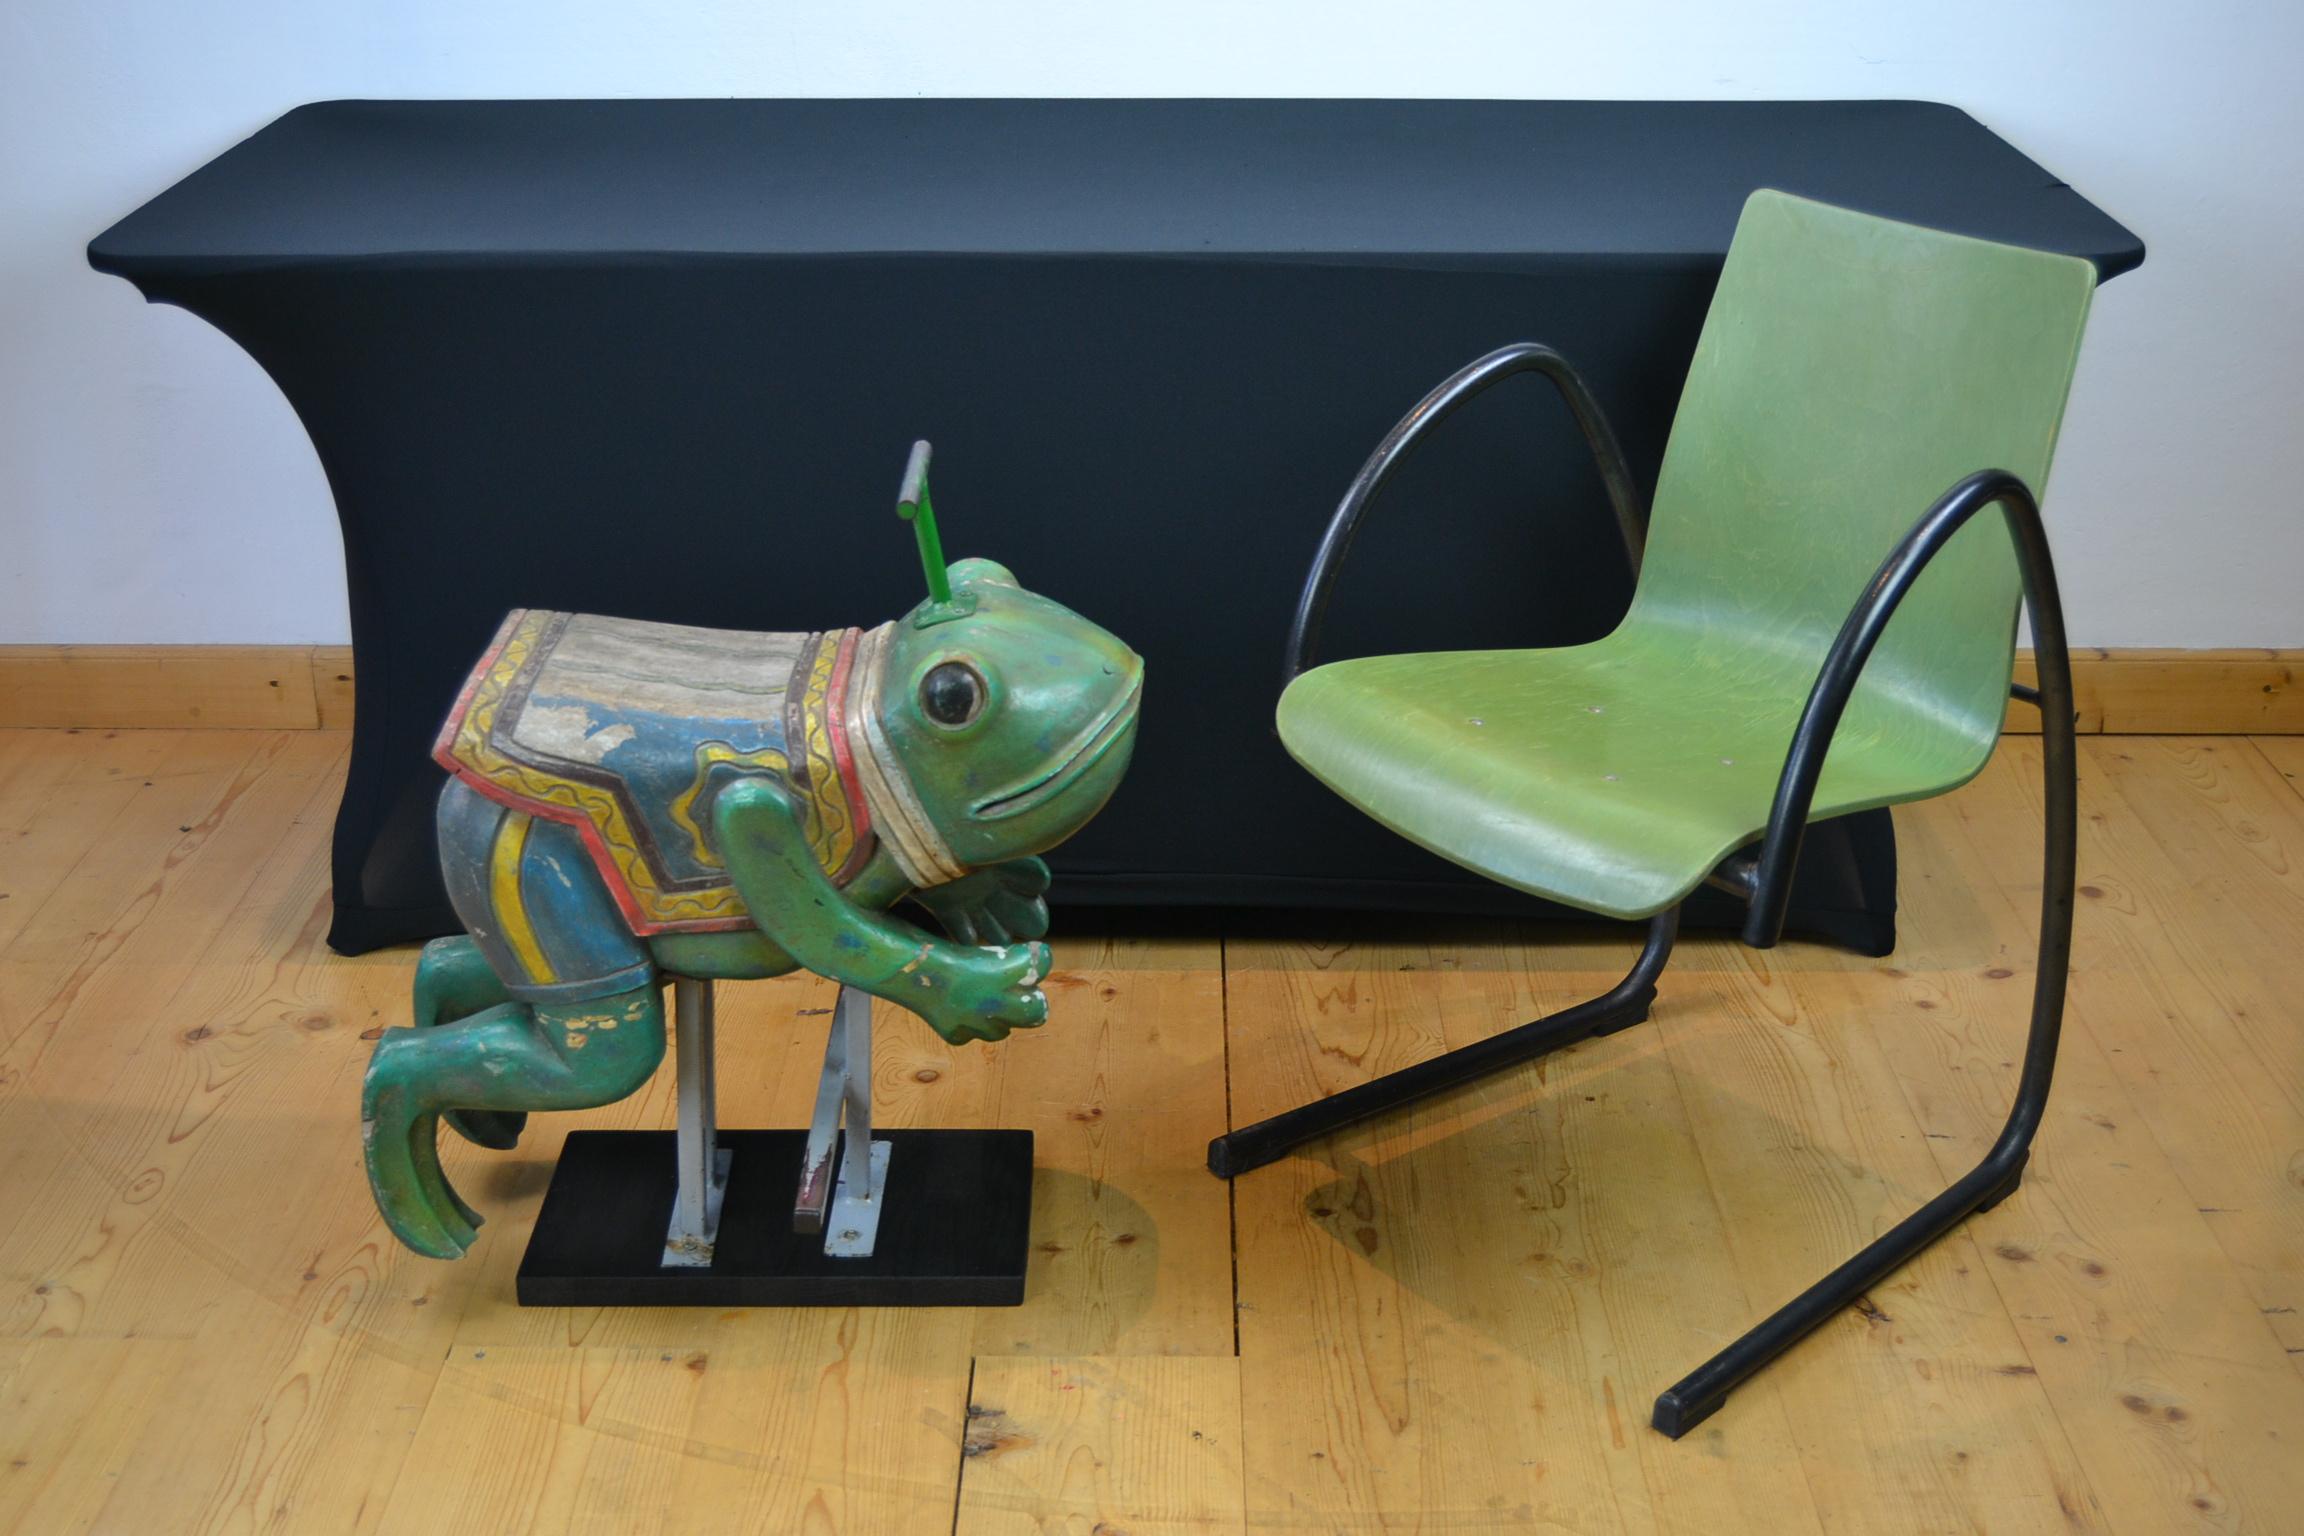 Vintage carousel frog sculpture. 
Who doesn't fall in love with this cute small animal children's fairground seat.
This frog seat was used on the Merry-go-round and dates circa 1970 - 1980. 
It's a full wooden jumping frog animal on two iron